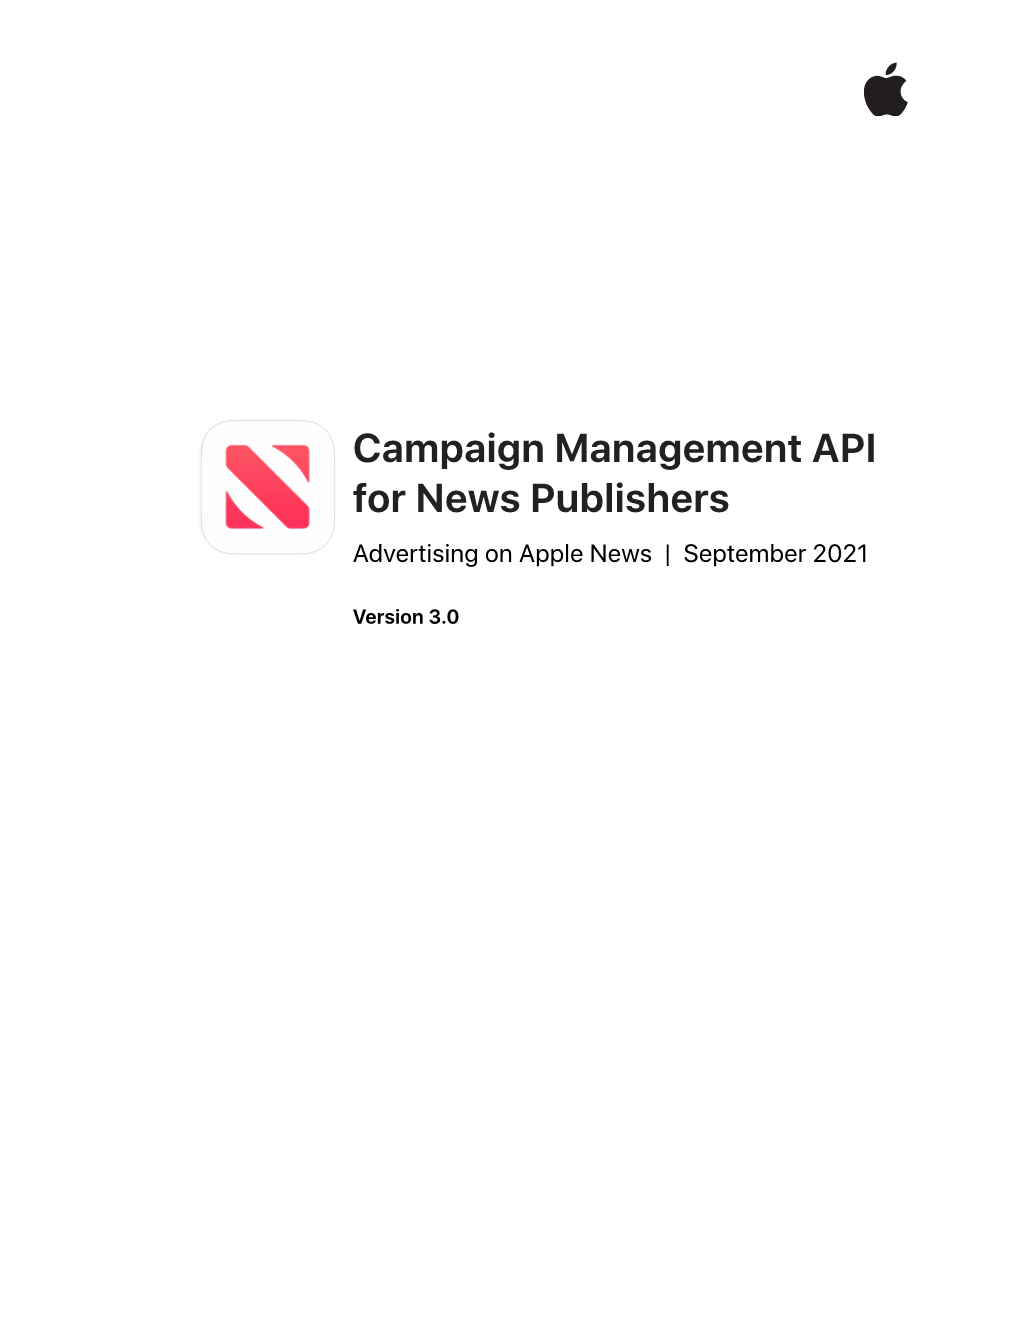 Campaign Management API for News Publishers Advertising on Apple News | September 2021